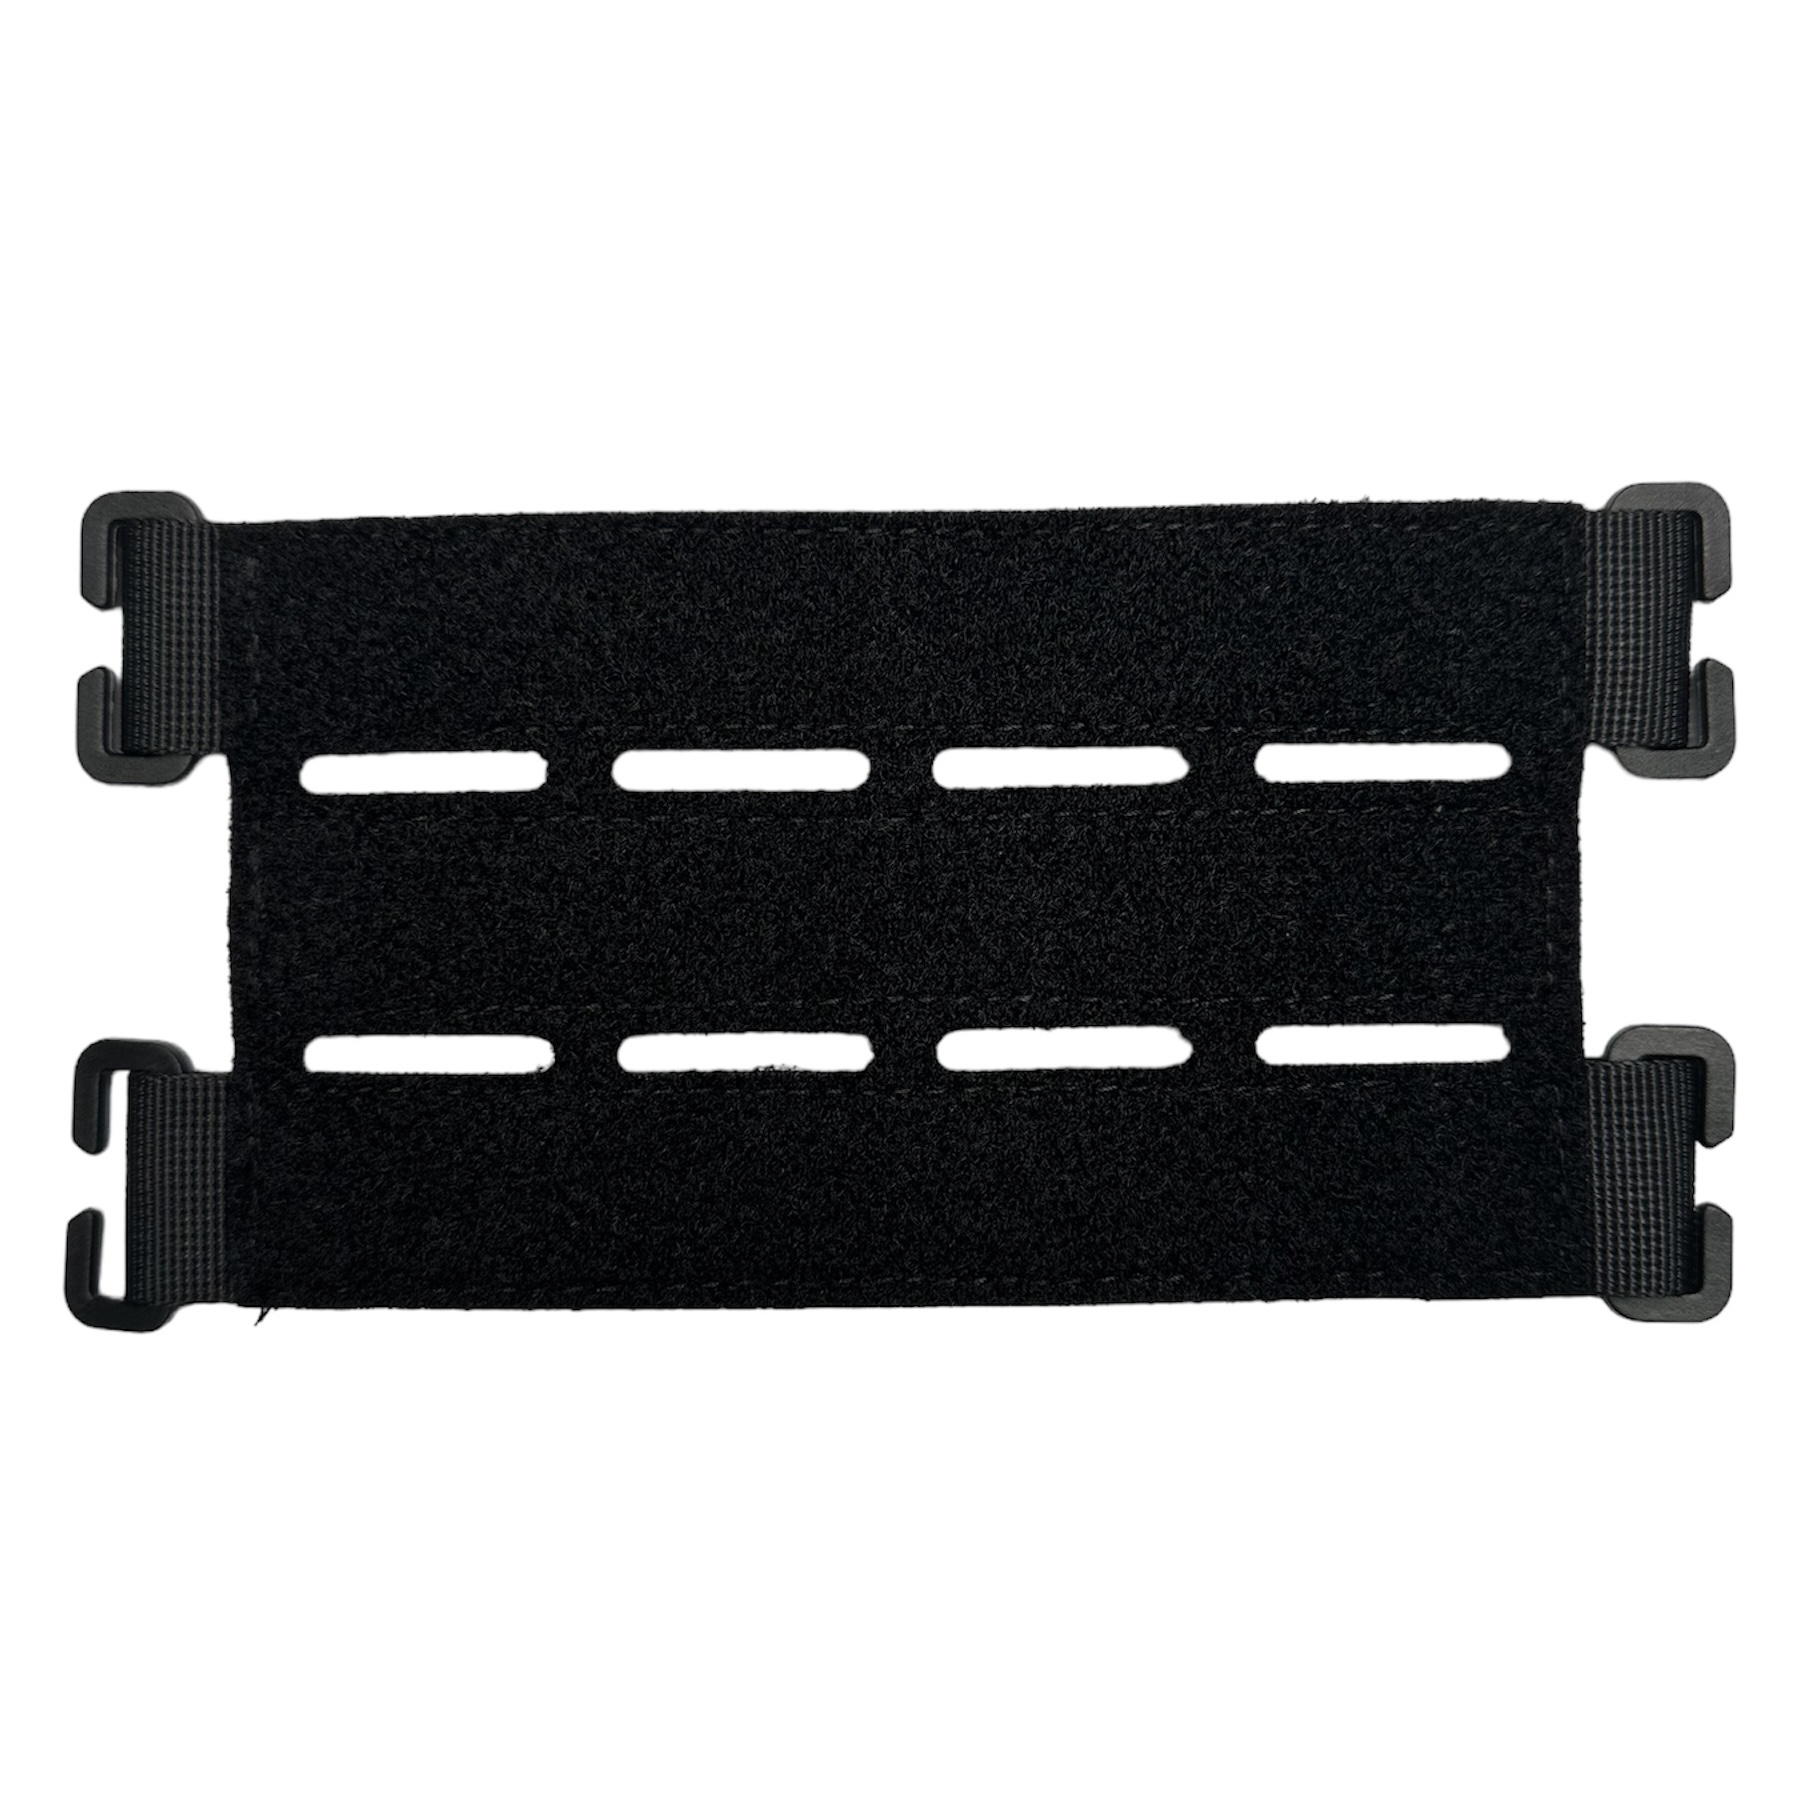 Velcro Patch Panel Slip Hook Adaptor for MOLLE System